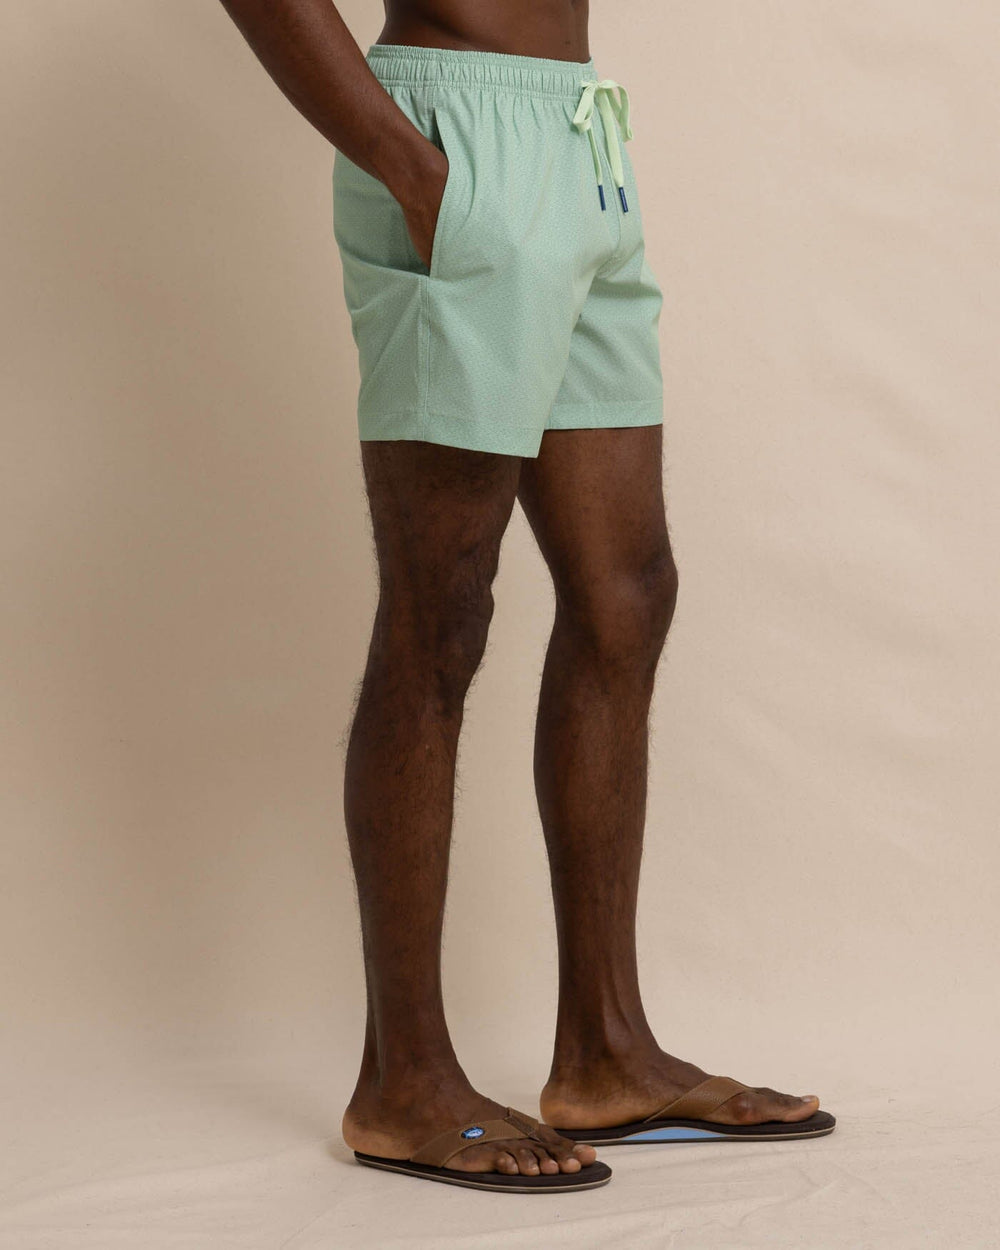 The front view of the Southern Tide It's Wavey Baby Swim Trunk by Southern Tide - Basil Green